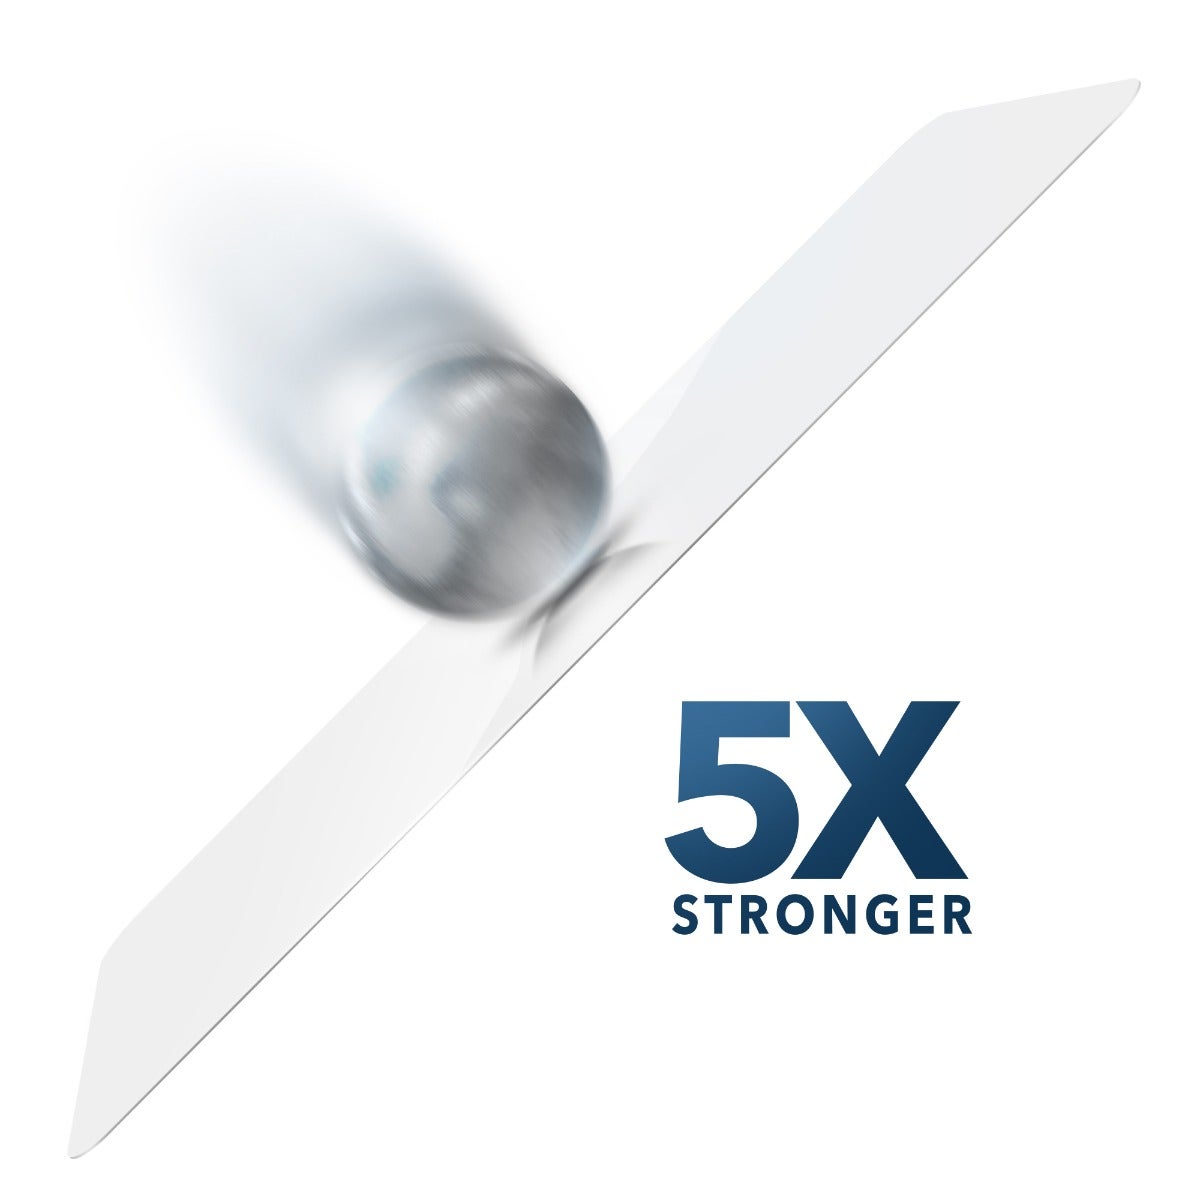 Extreme Scratch & Shatter Protection
|| 5x stronger than traditional glass screen protection with ion exchange technology